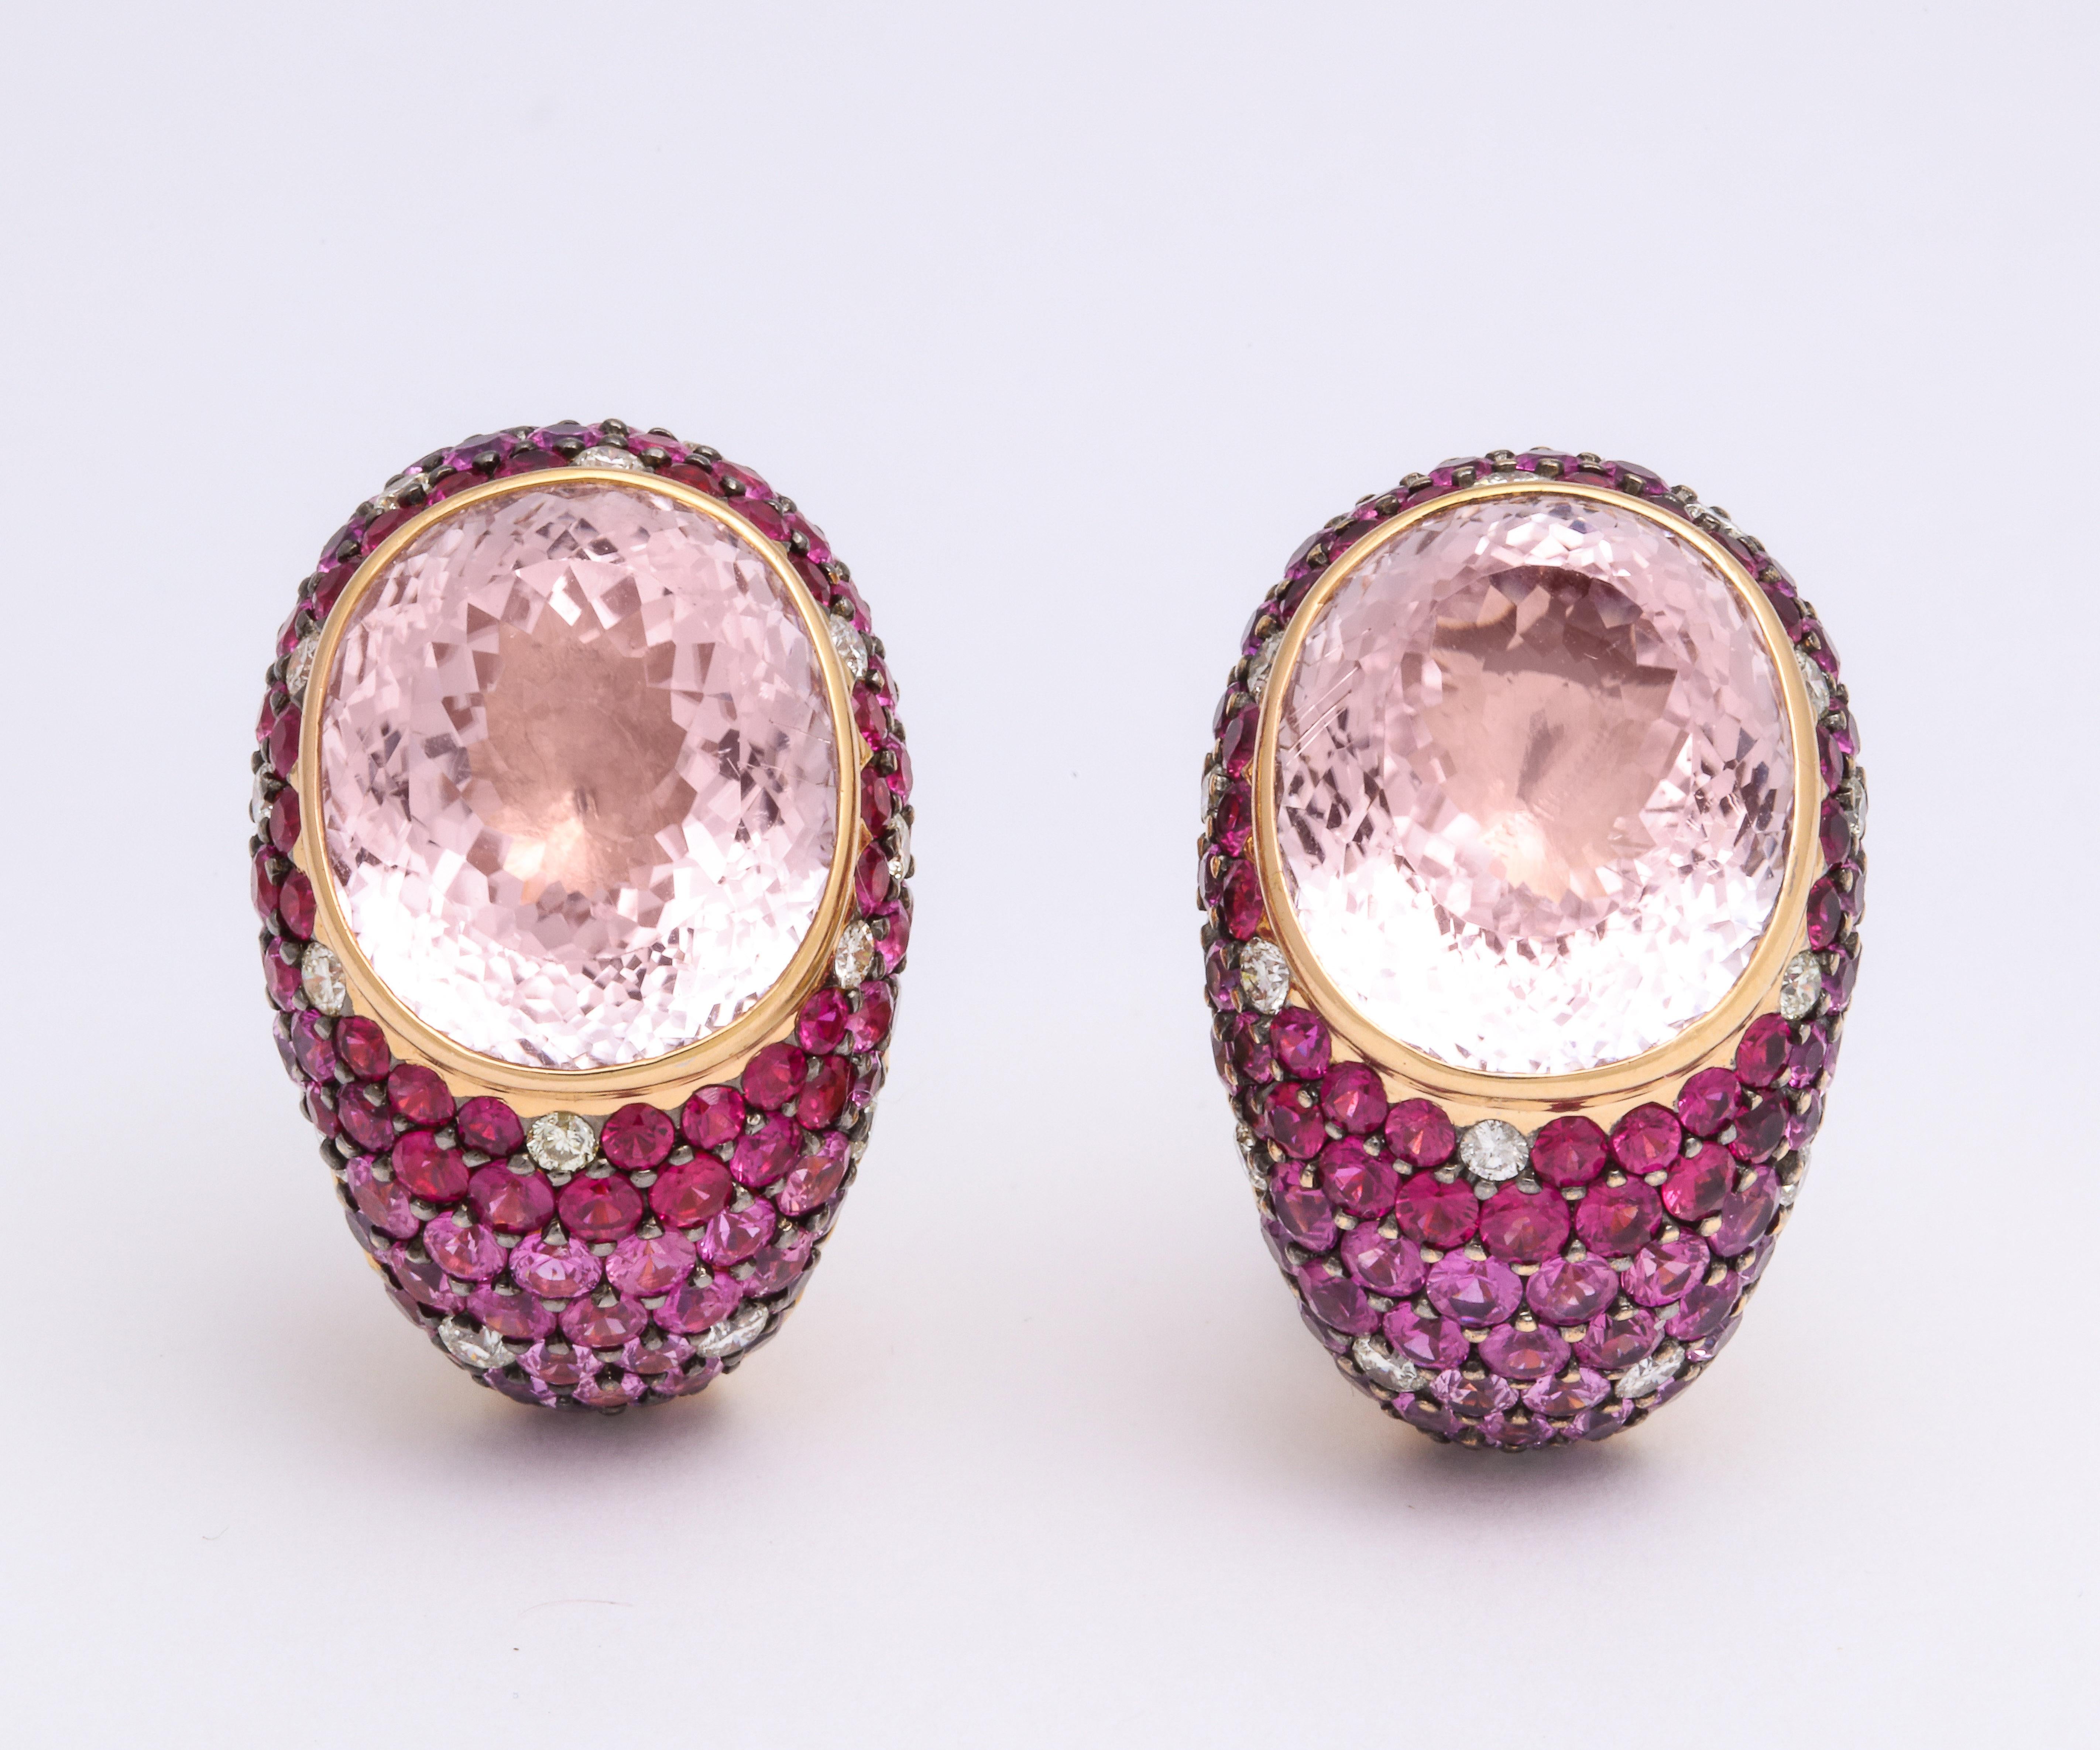 Smart and festive 18K rose gold bombe' (domed) earclips mounted with bezel-set oval shaped faceted skin-tone kunzite: 25.80 carats, decorated with pave'-set, diamond-cut, multi color striae pink sapphires: 8.13 carats, and staggered round